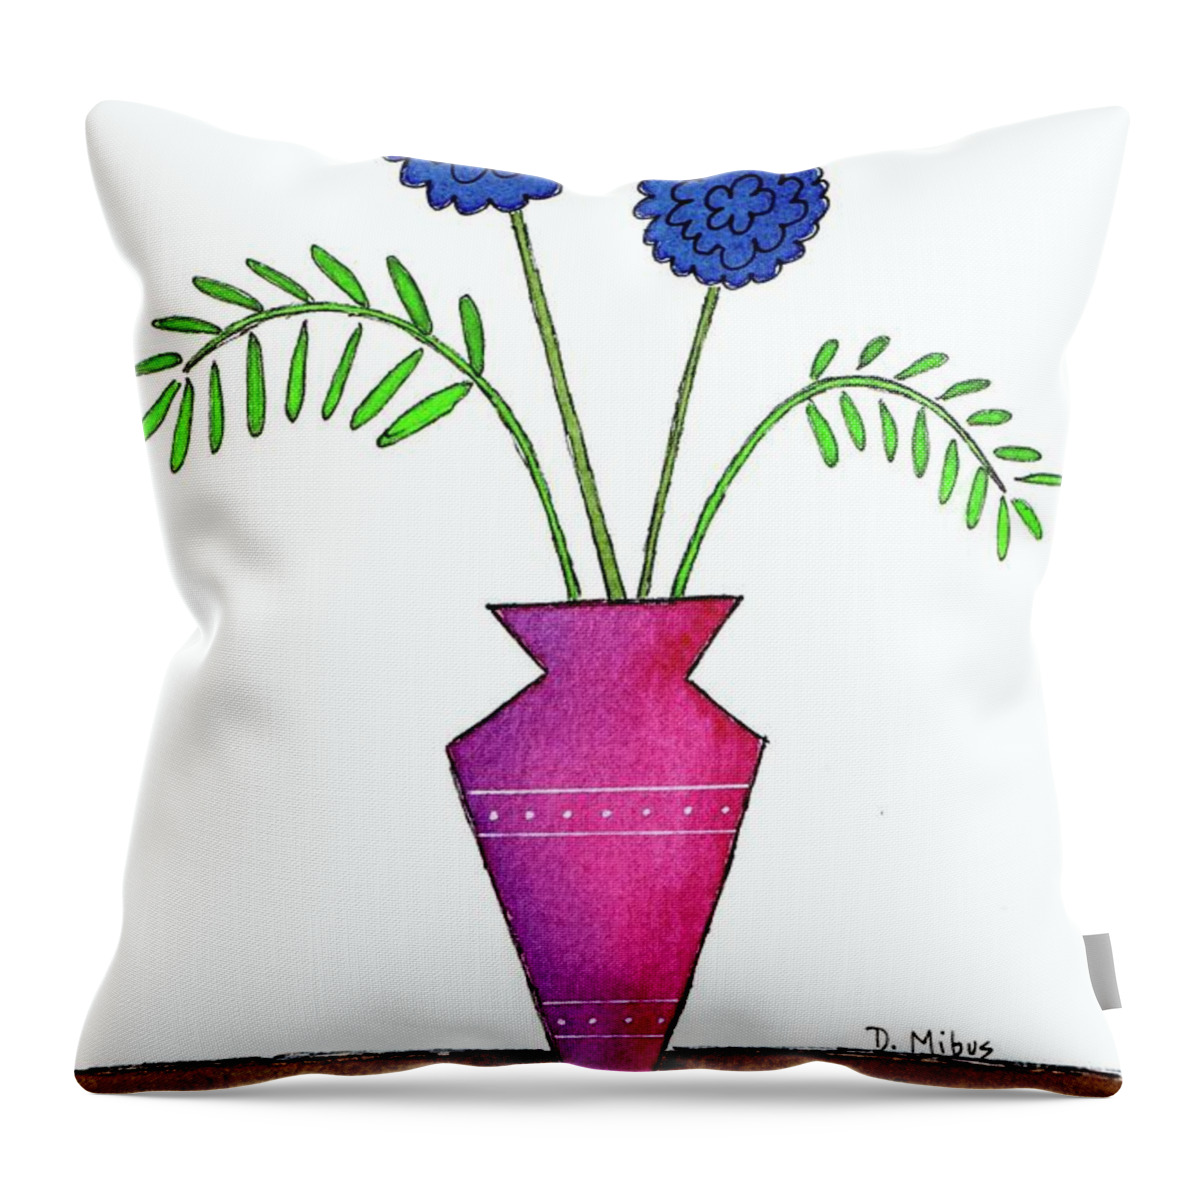 Mid Century Modern Flowers Throw Pillow featuring the painting Whimsical Blue Flowers in Pinkish Purple Vase by Donna Mibus